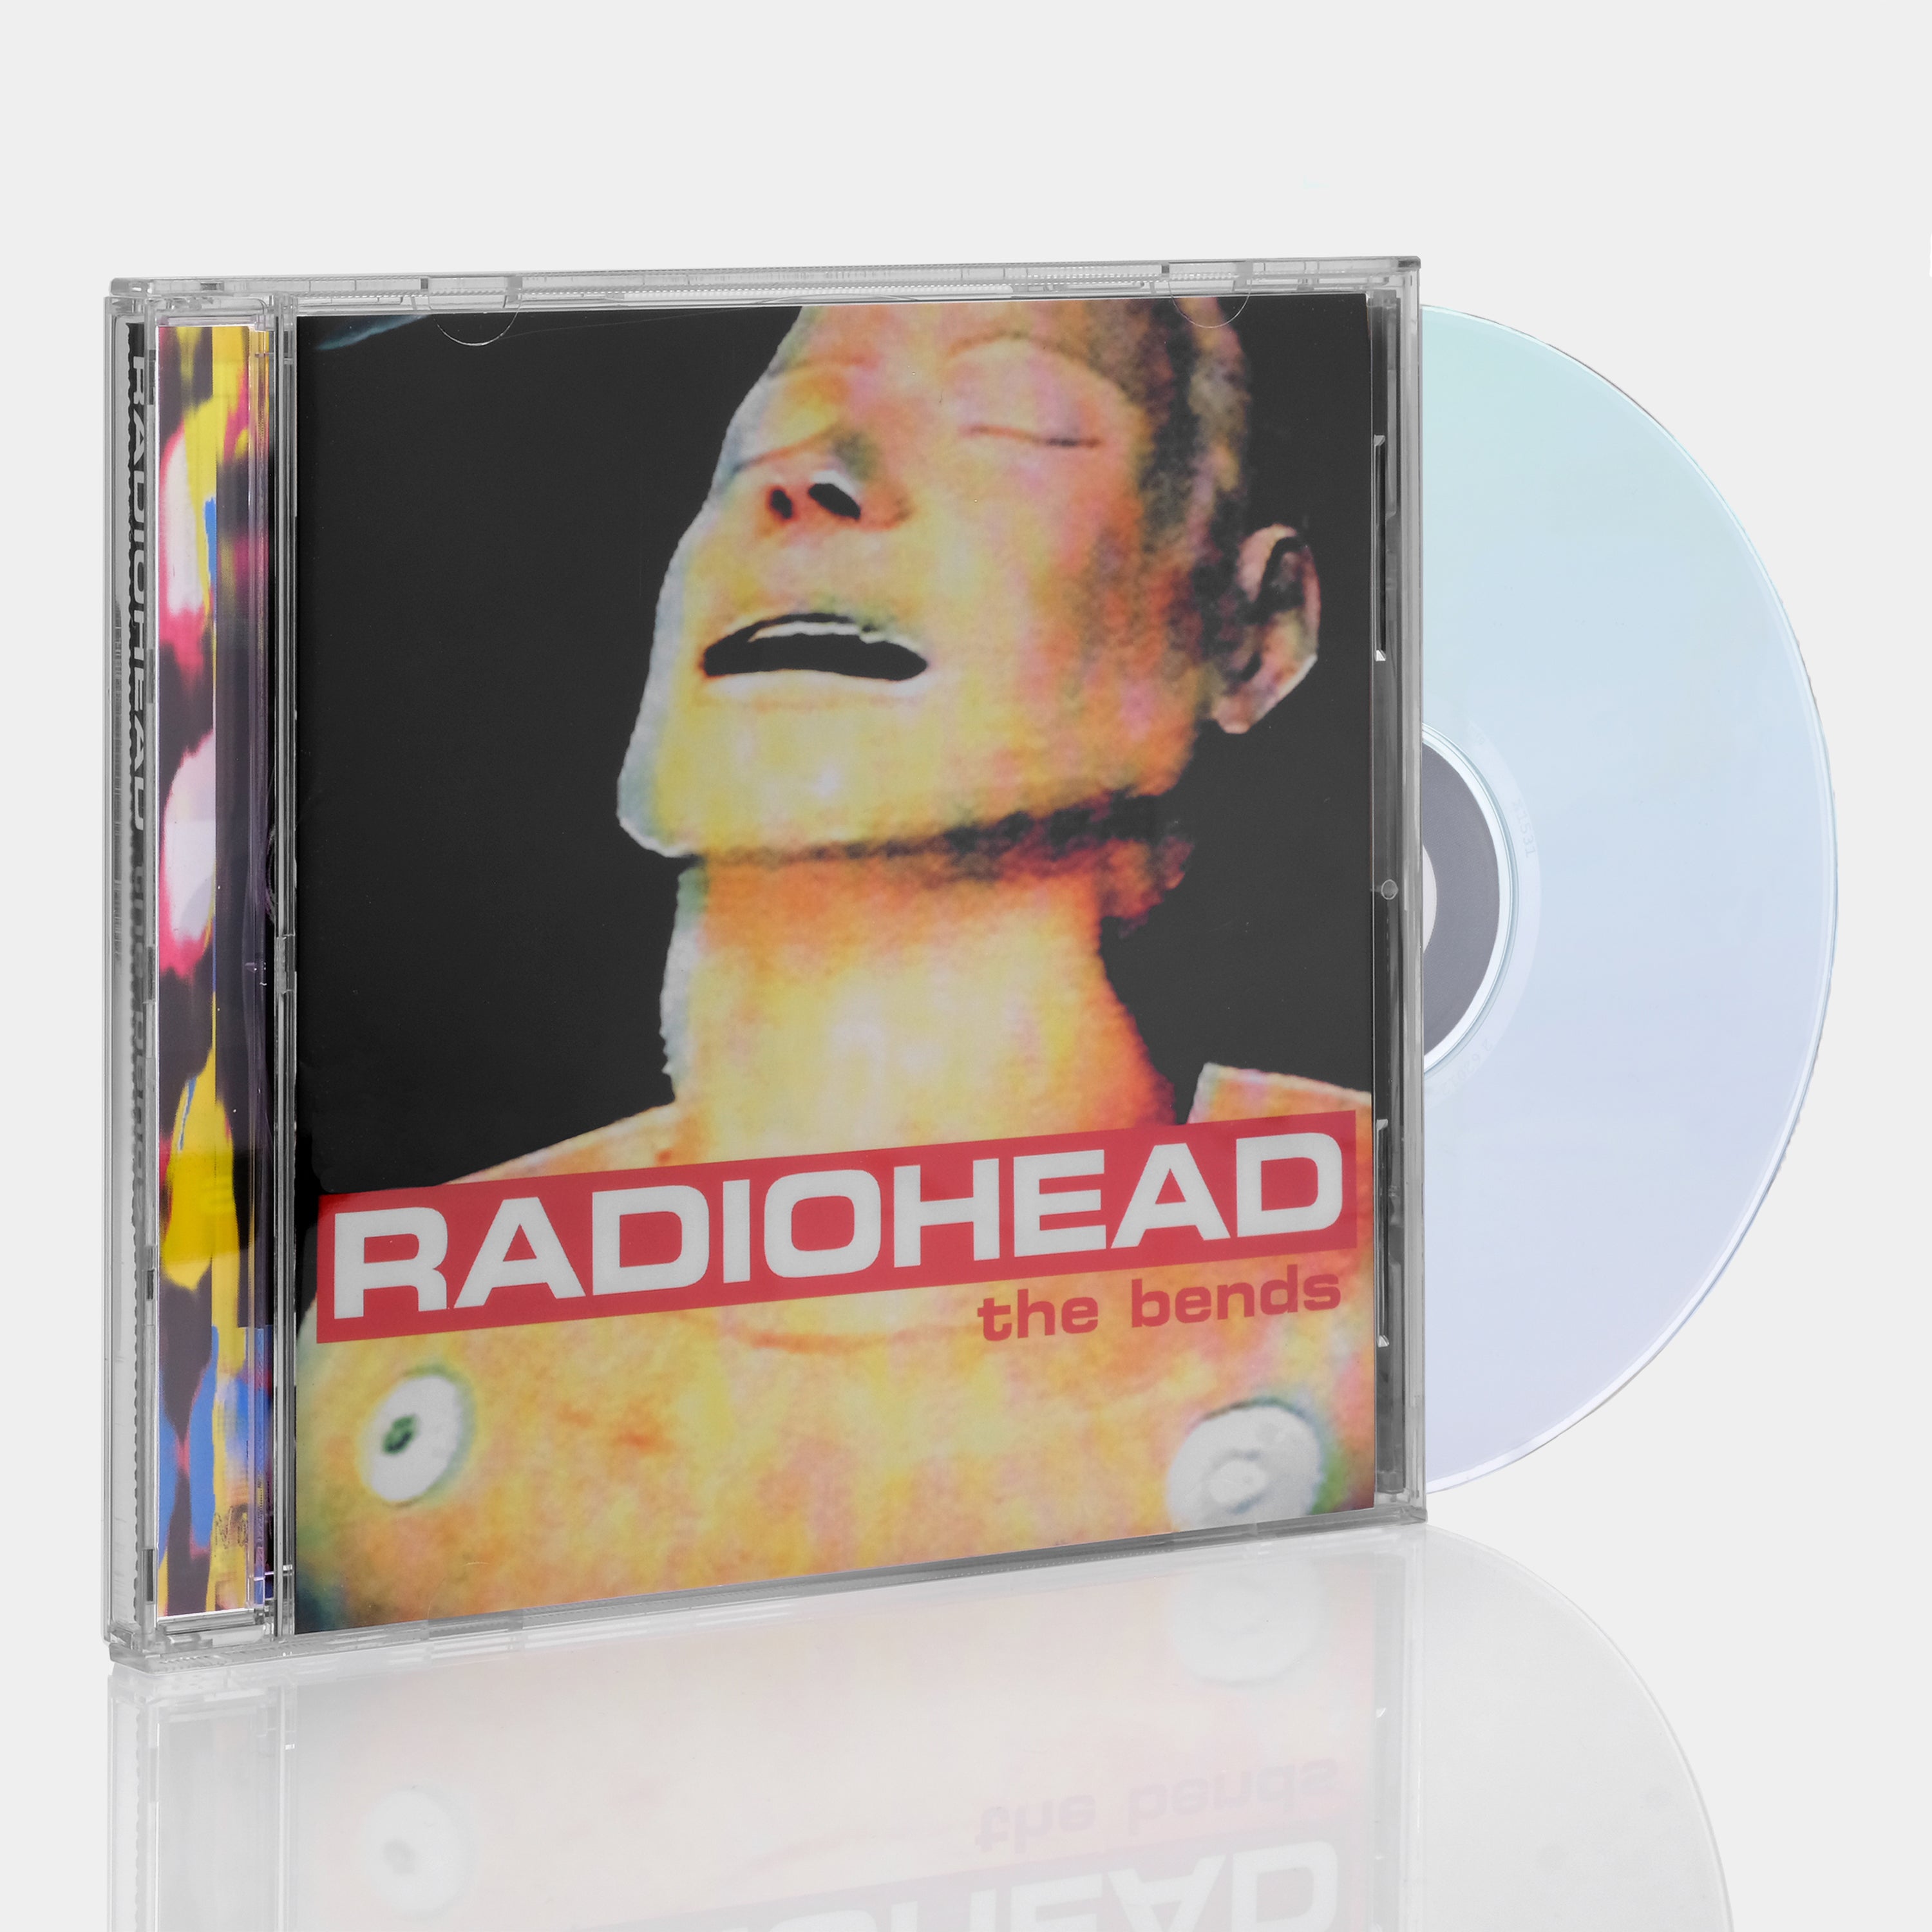 Radiohead The Bends CD front